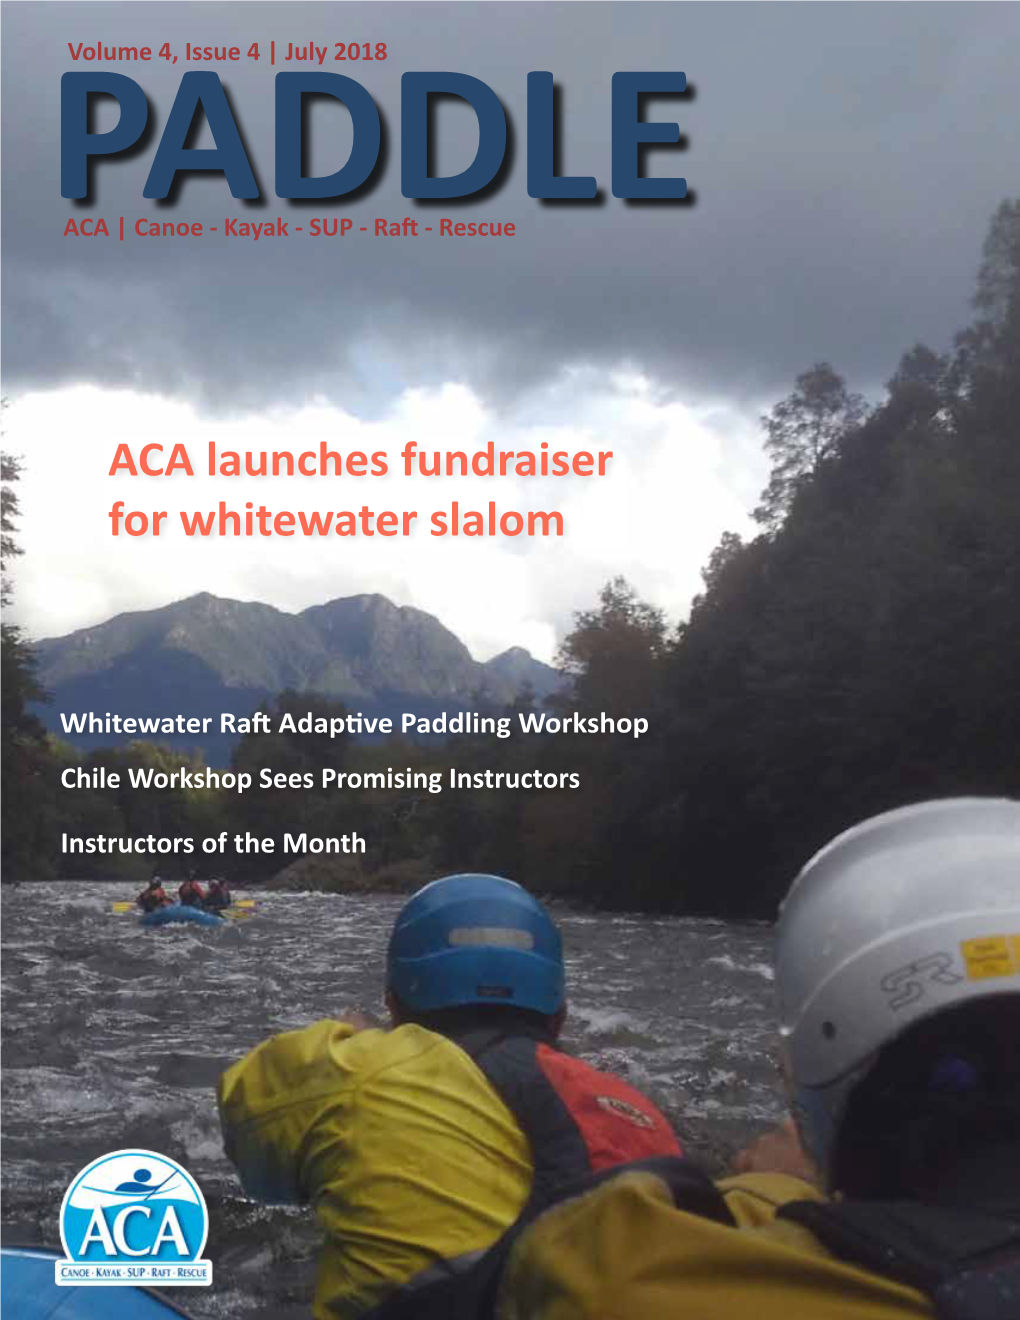 ACA Launches Fundraiser for Whitewater Slalom